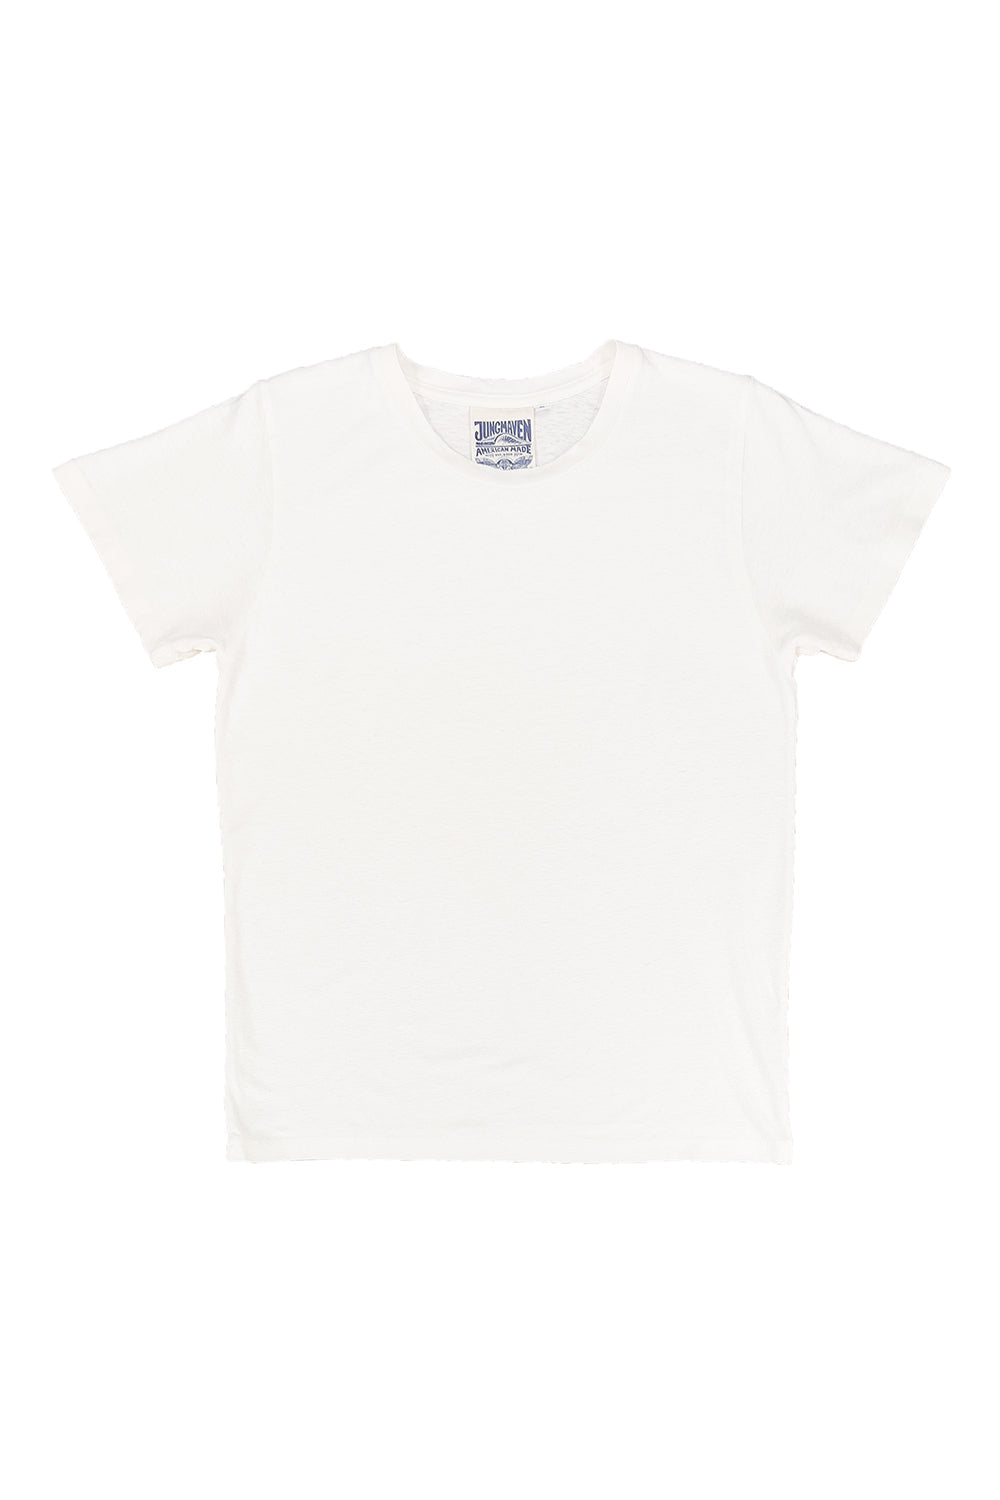 Hemp and cotton blend tee. Light-weight, vintage shape with subtle texture. Wide, open neck with a roomy shoulder and capped sleeves. Jungmaven tees form to the way you live and move in them and they get better with age.